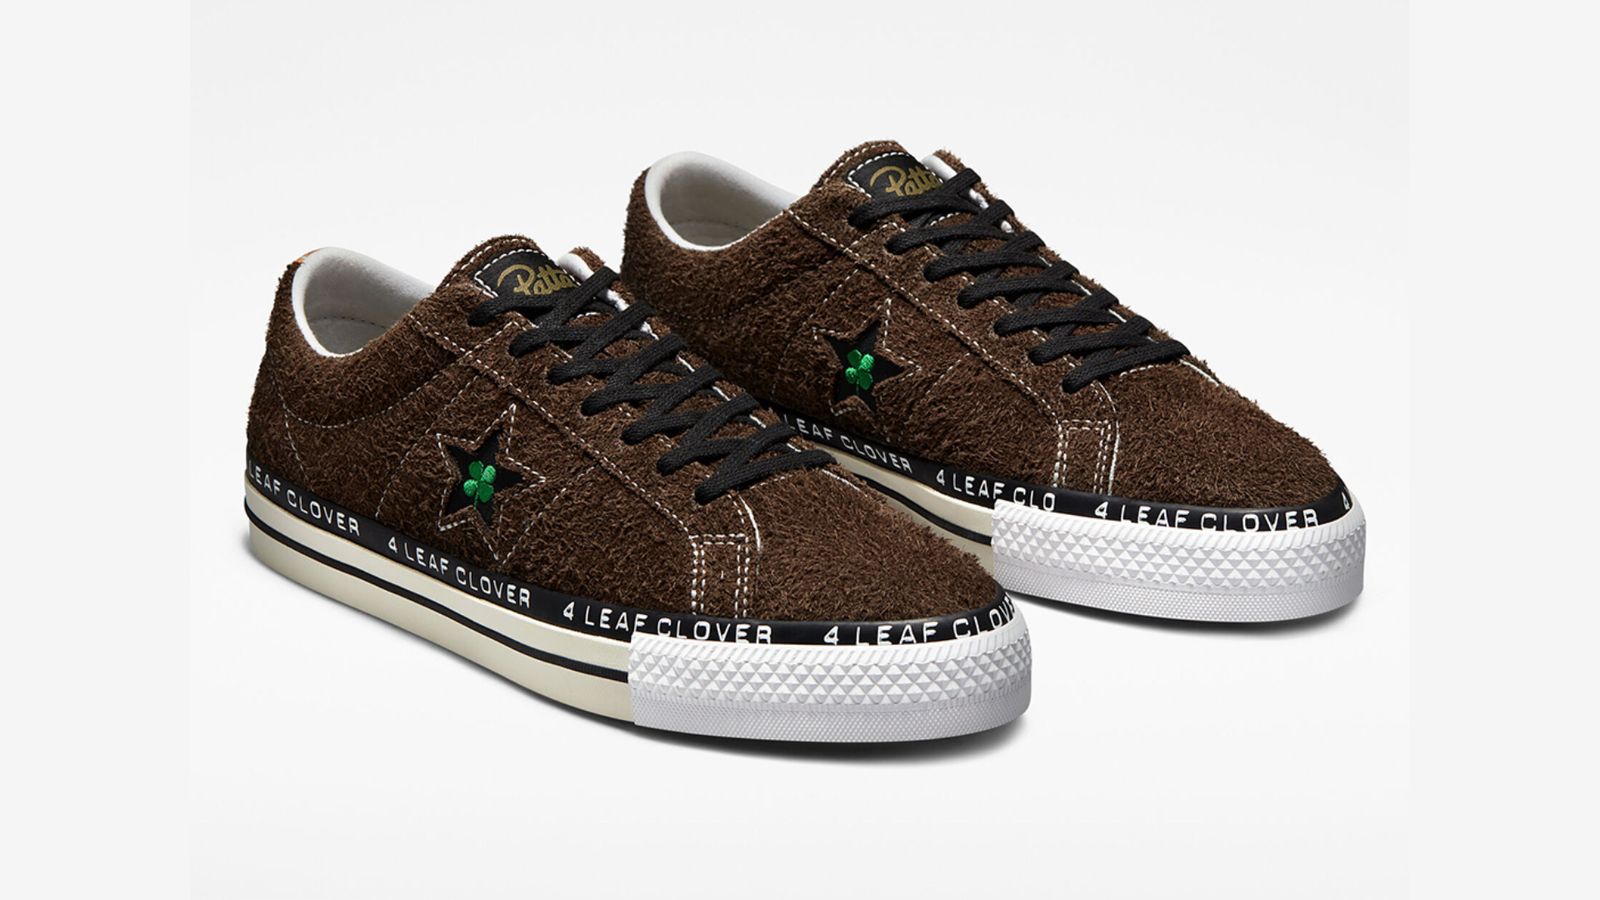 Patta x Converse One Star Pro "Four Leaf Clover" product image of a fluffy brown pair of shoes with white soles and featuring four leaf clover symbols in green on the sides.